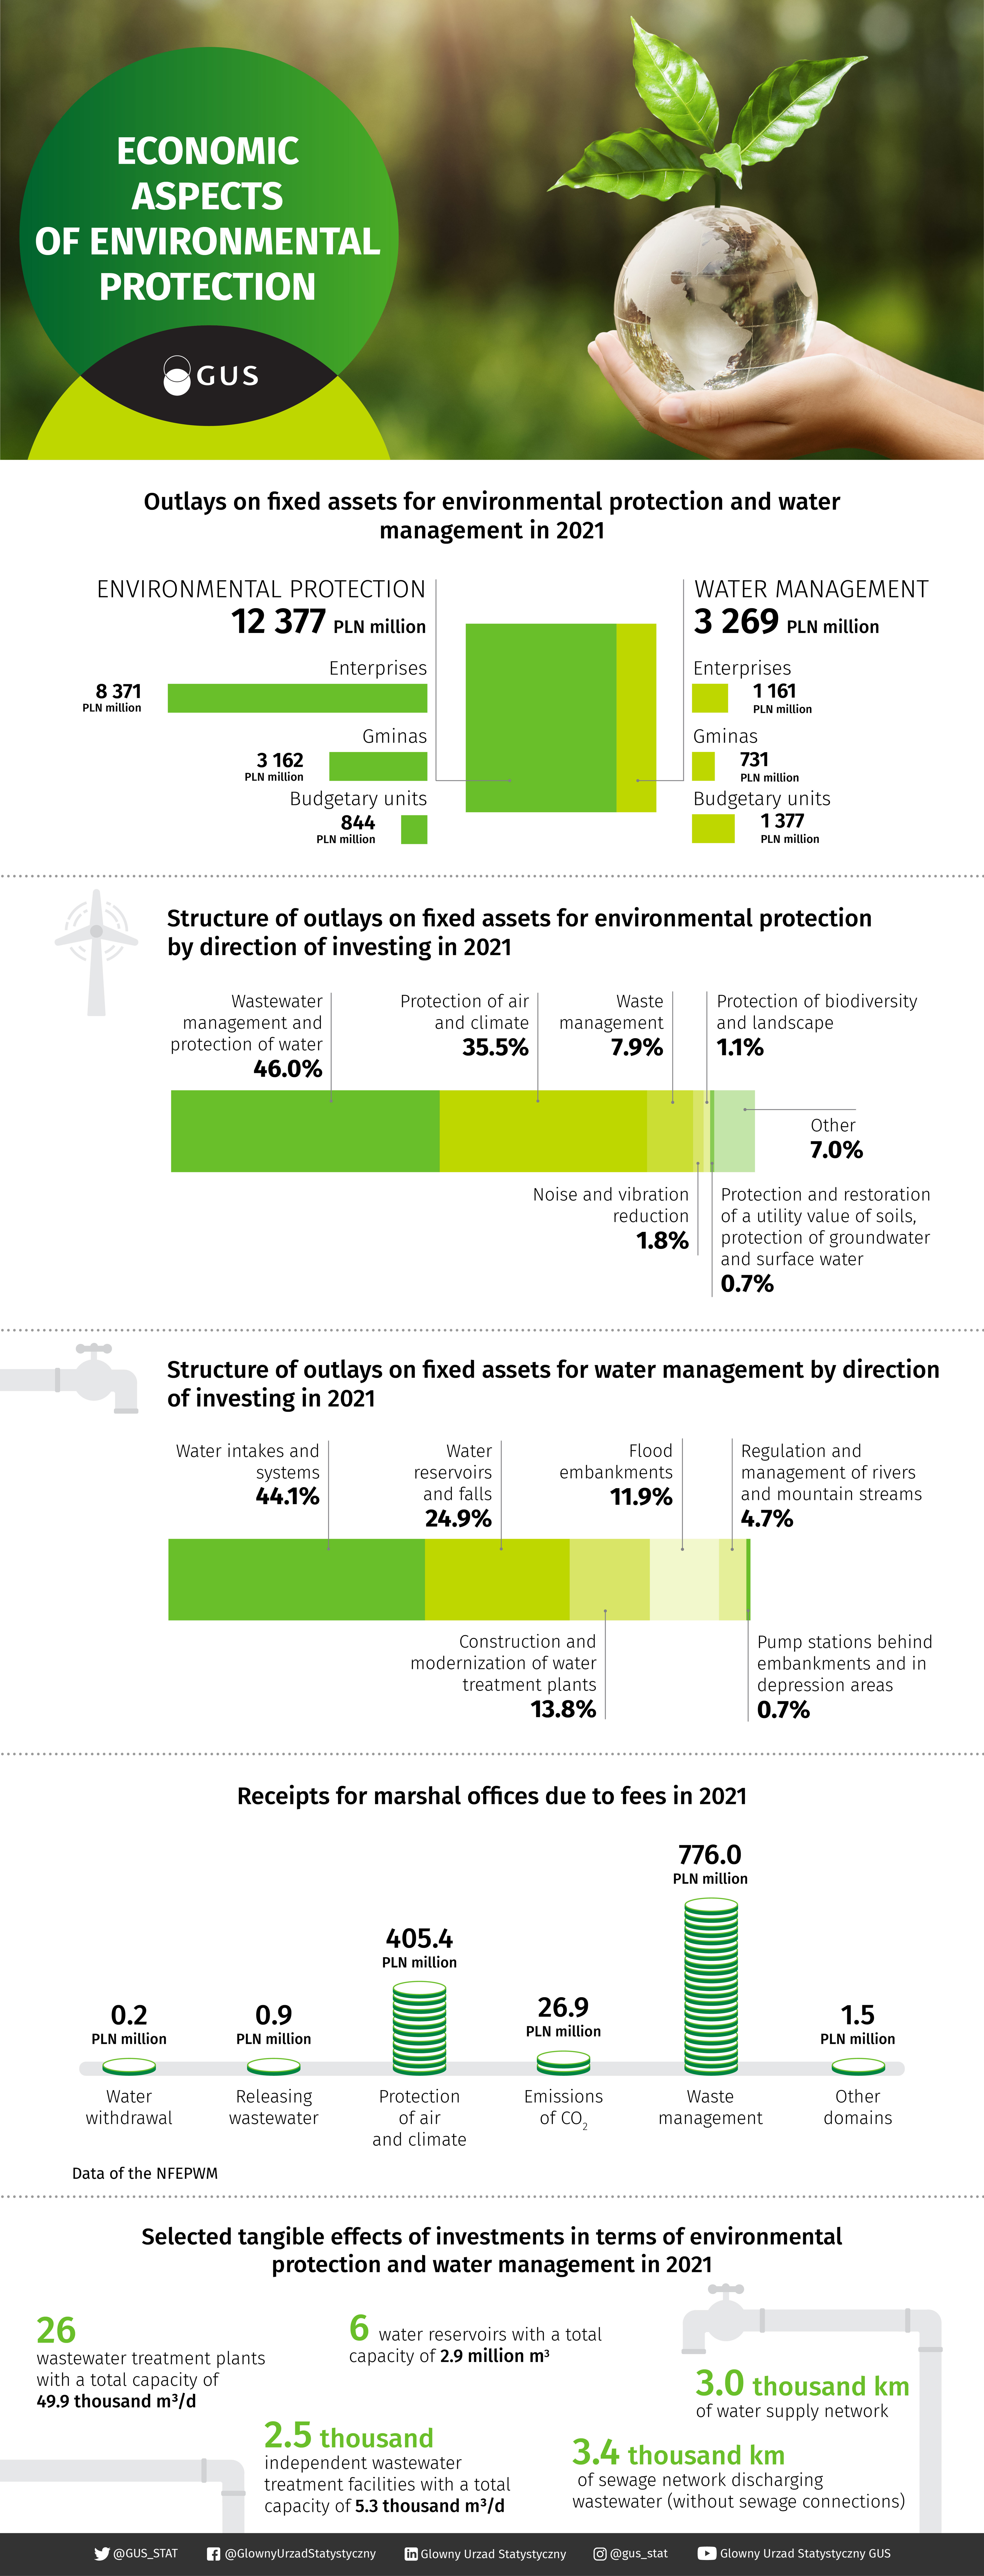 Infographic - Economic aspects of environmental protection 2021. Data for the infographic can be found in the Excel file attached below